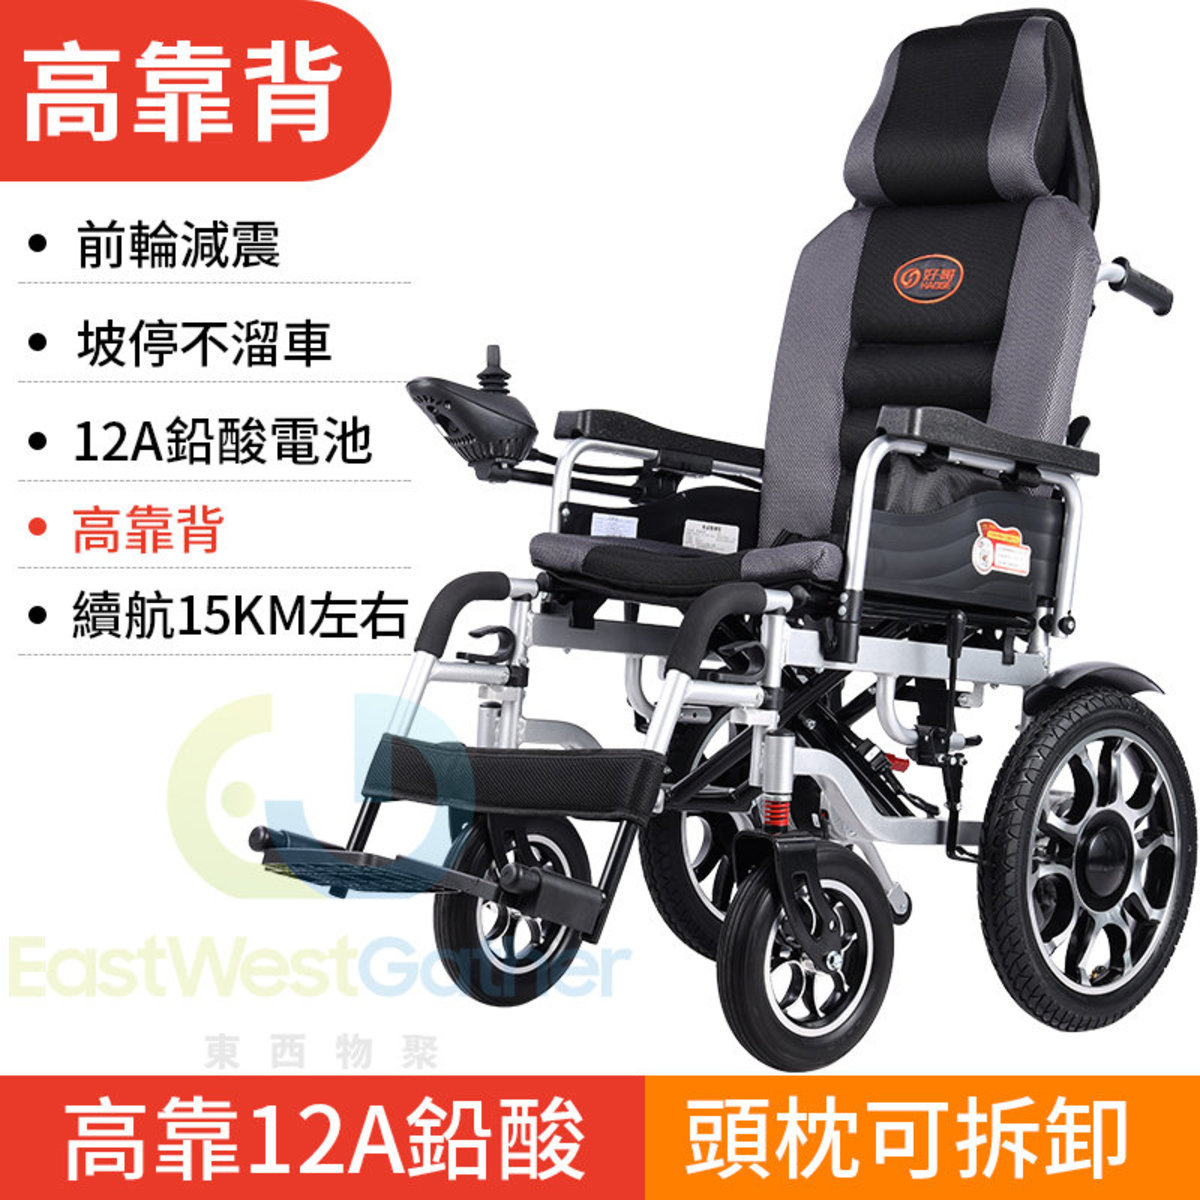 Include installation and delivery high back / high back / front wheel shock absorption 12A lead acid battery [about 15km] electric wheelchair